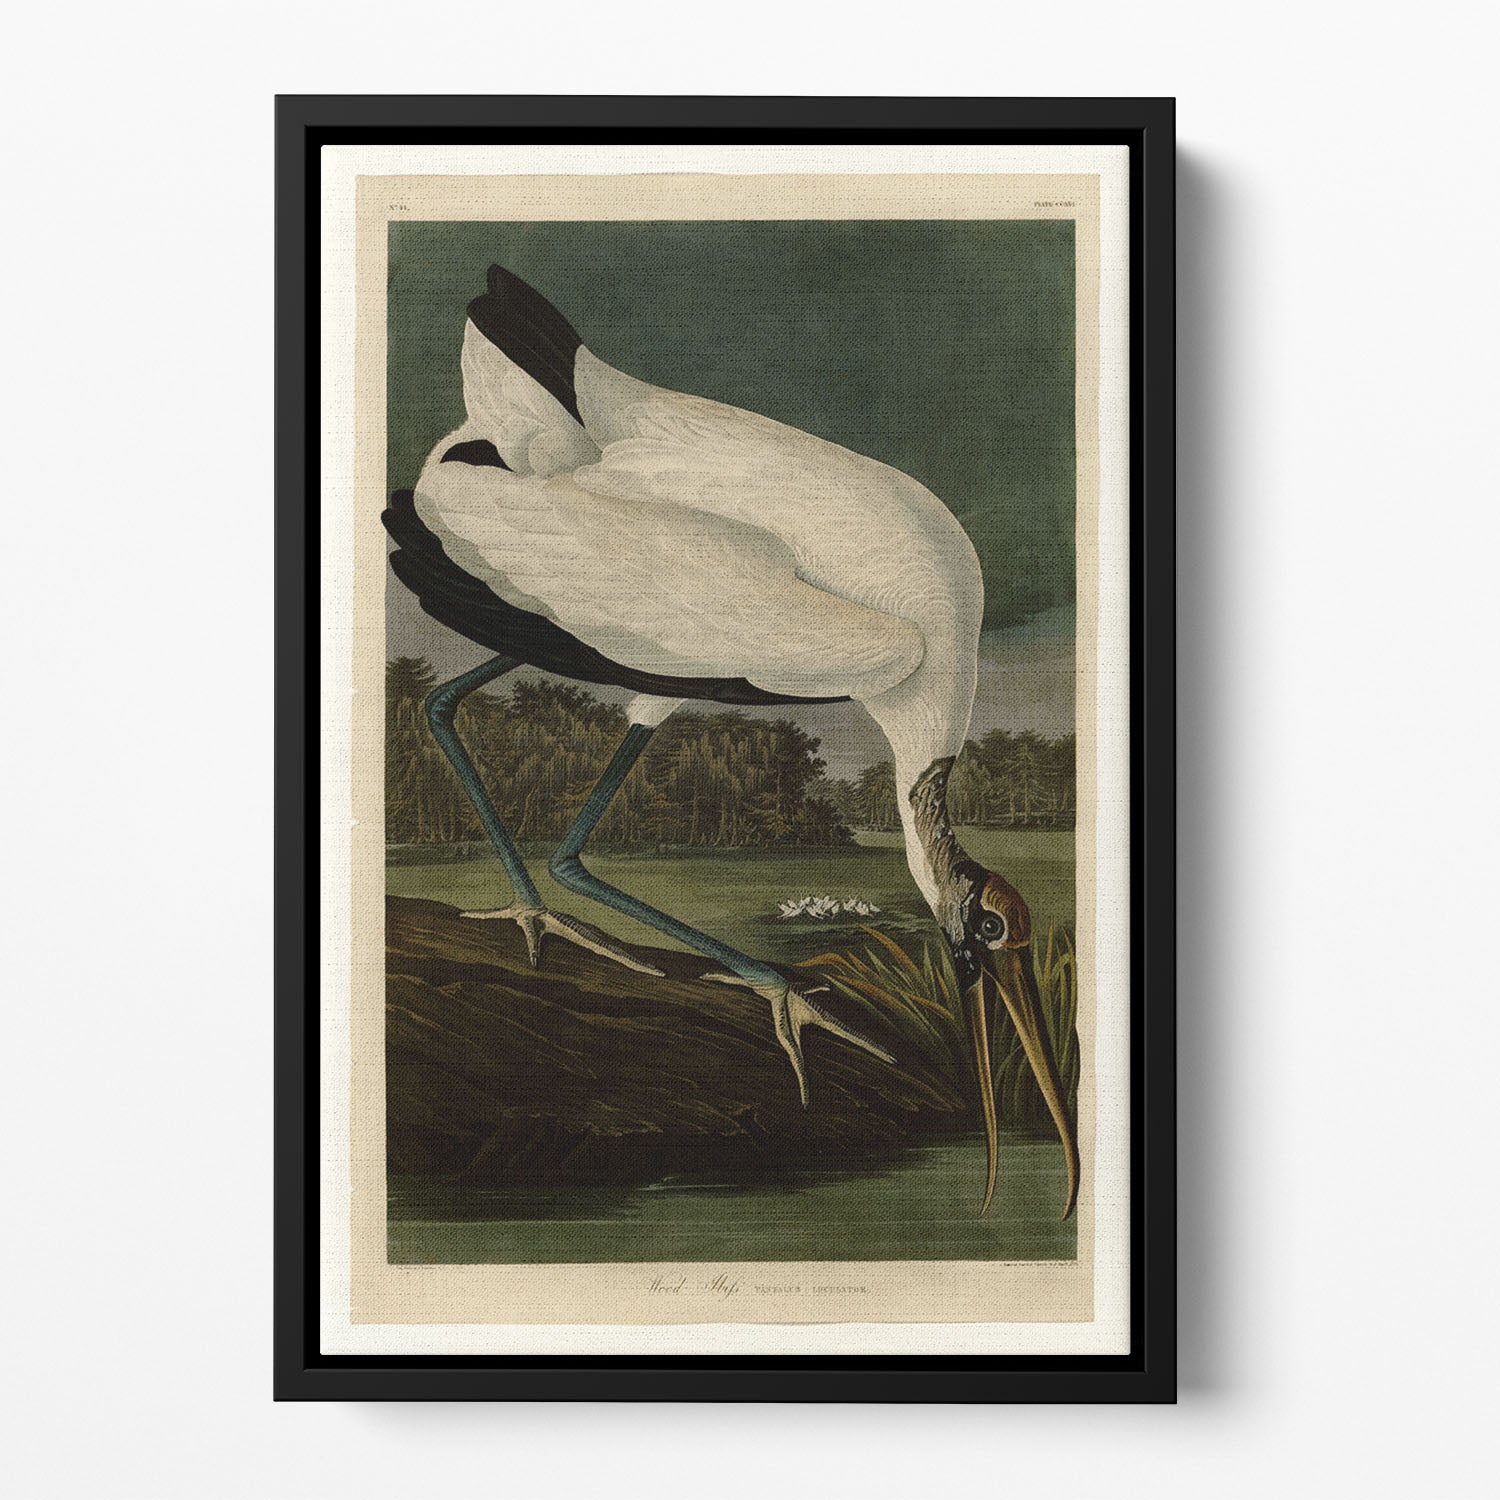 Wood Ibiss by Audubon Floating Framed Canvas